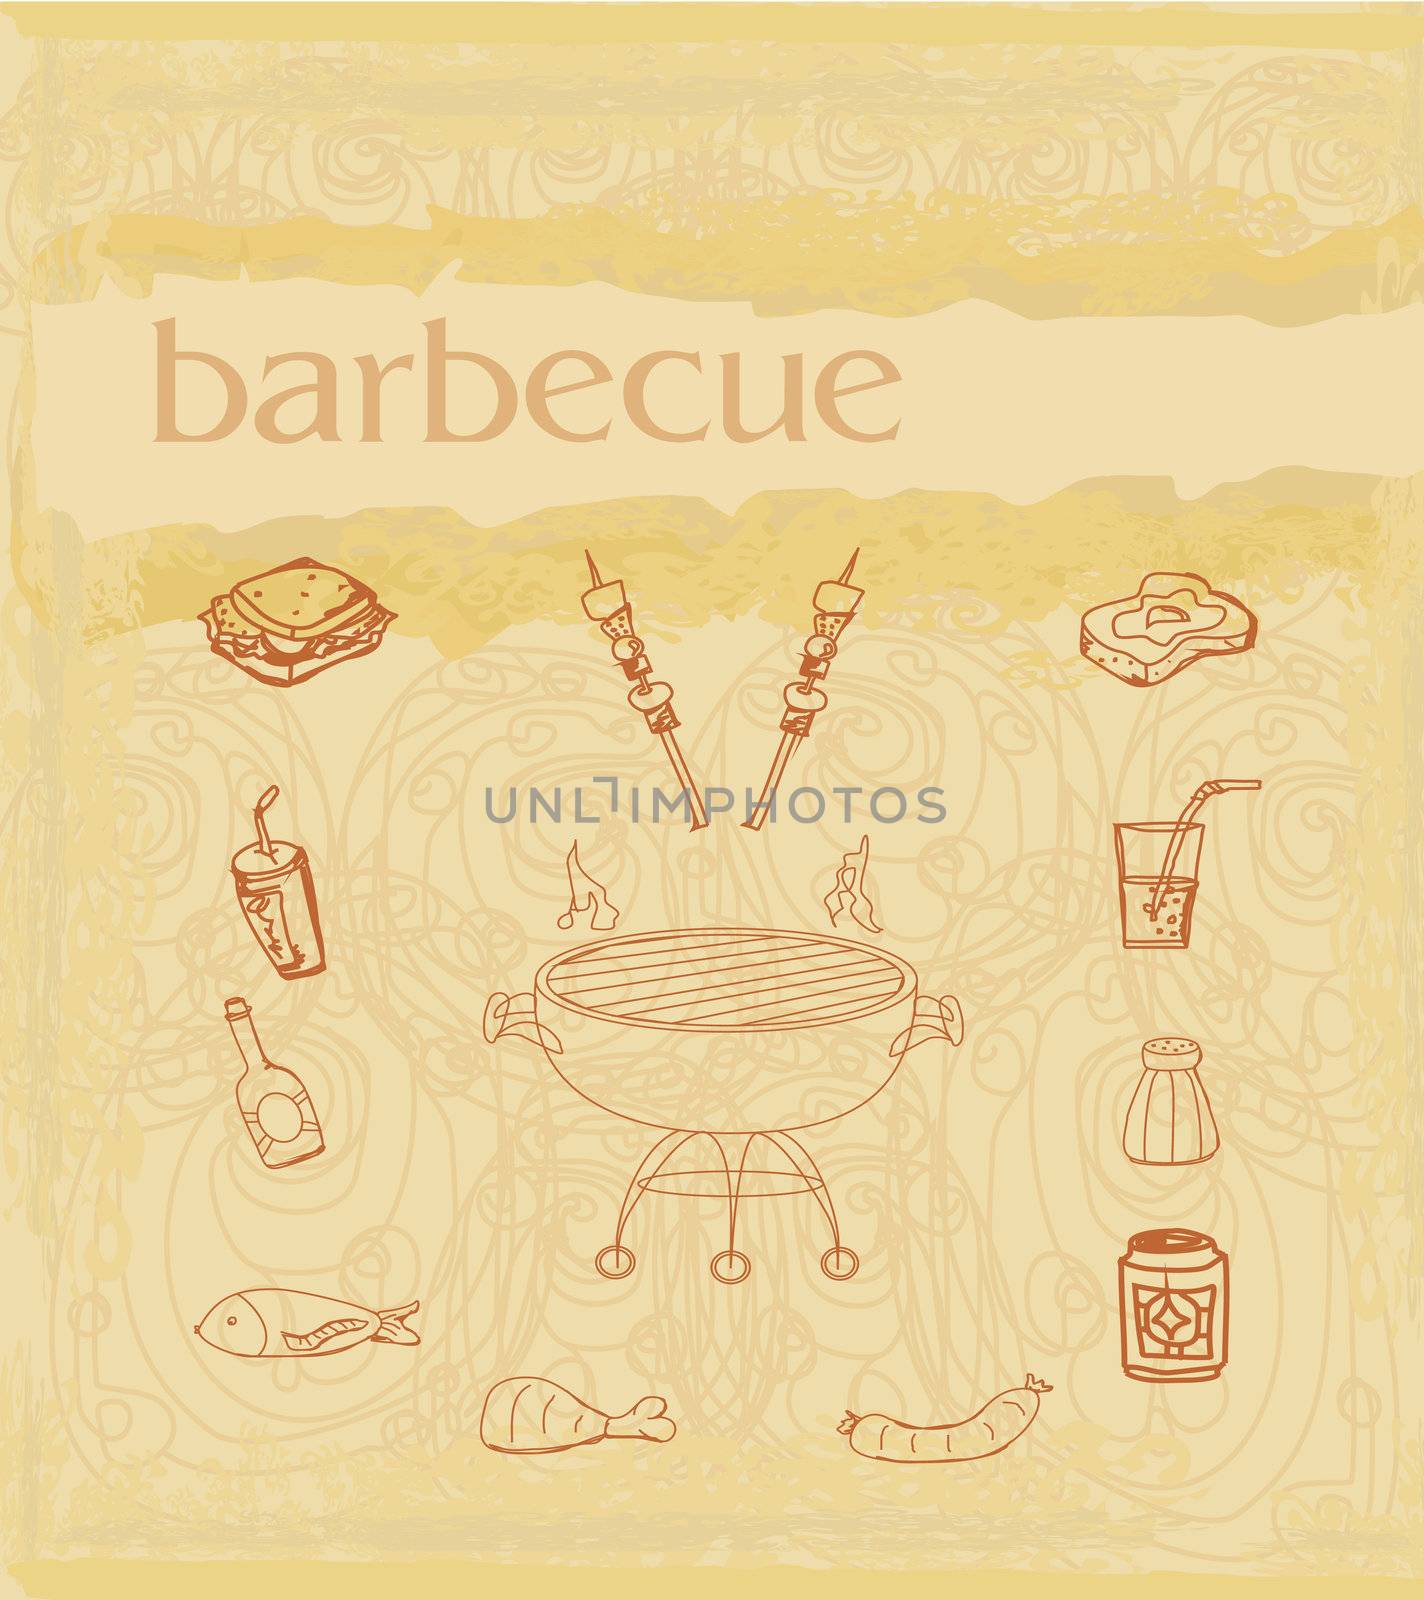 Barbecue Party Invitation by JackyBrown